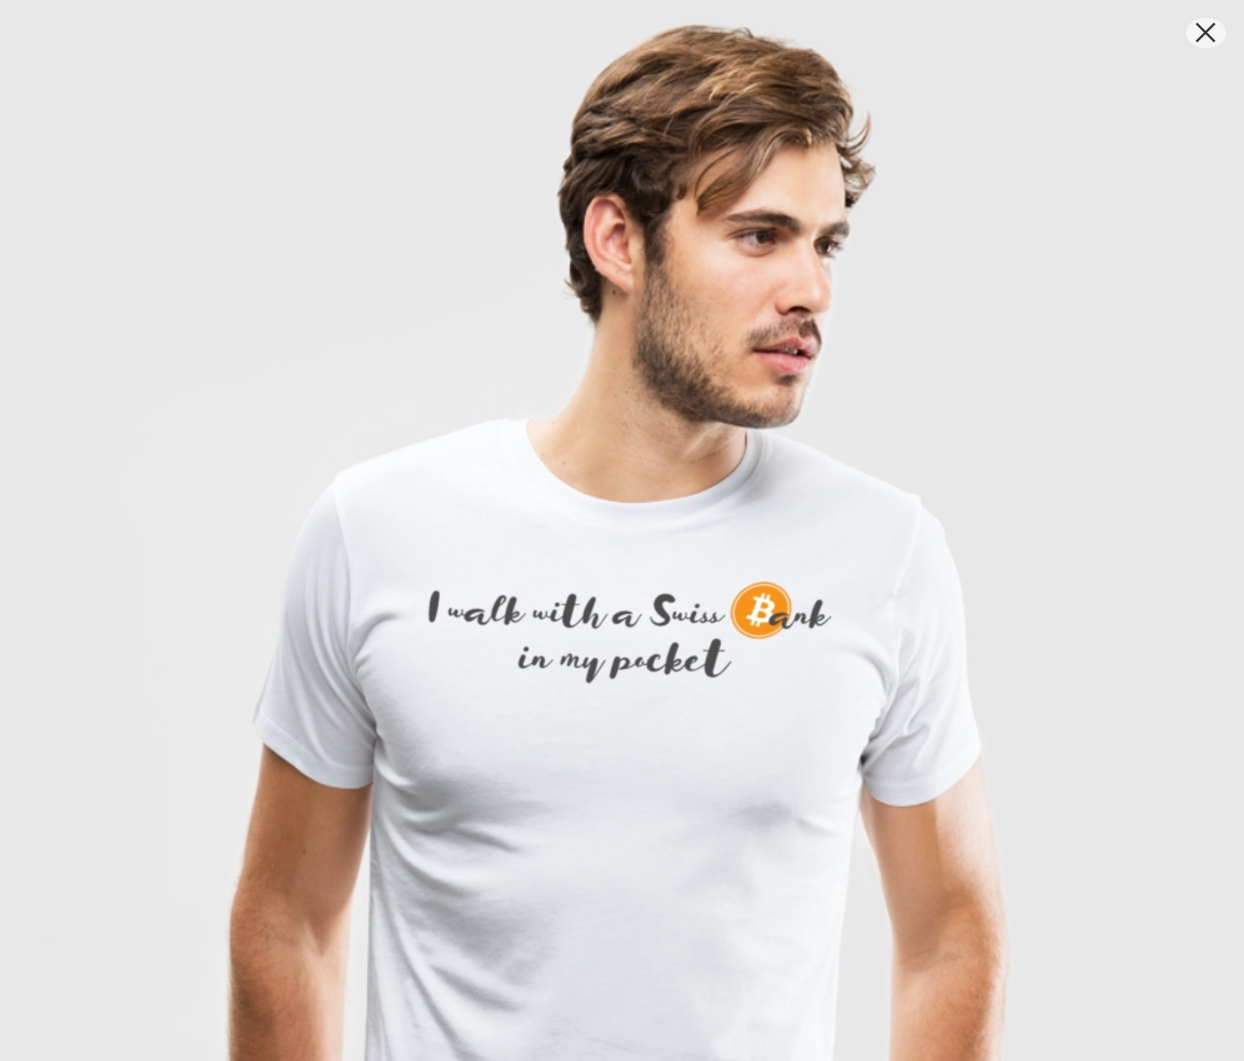 I walk with a Swiss bank in my pocket  Bitcoin. T Shirt   Spreadshirt.png